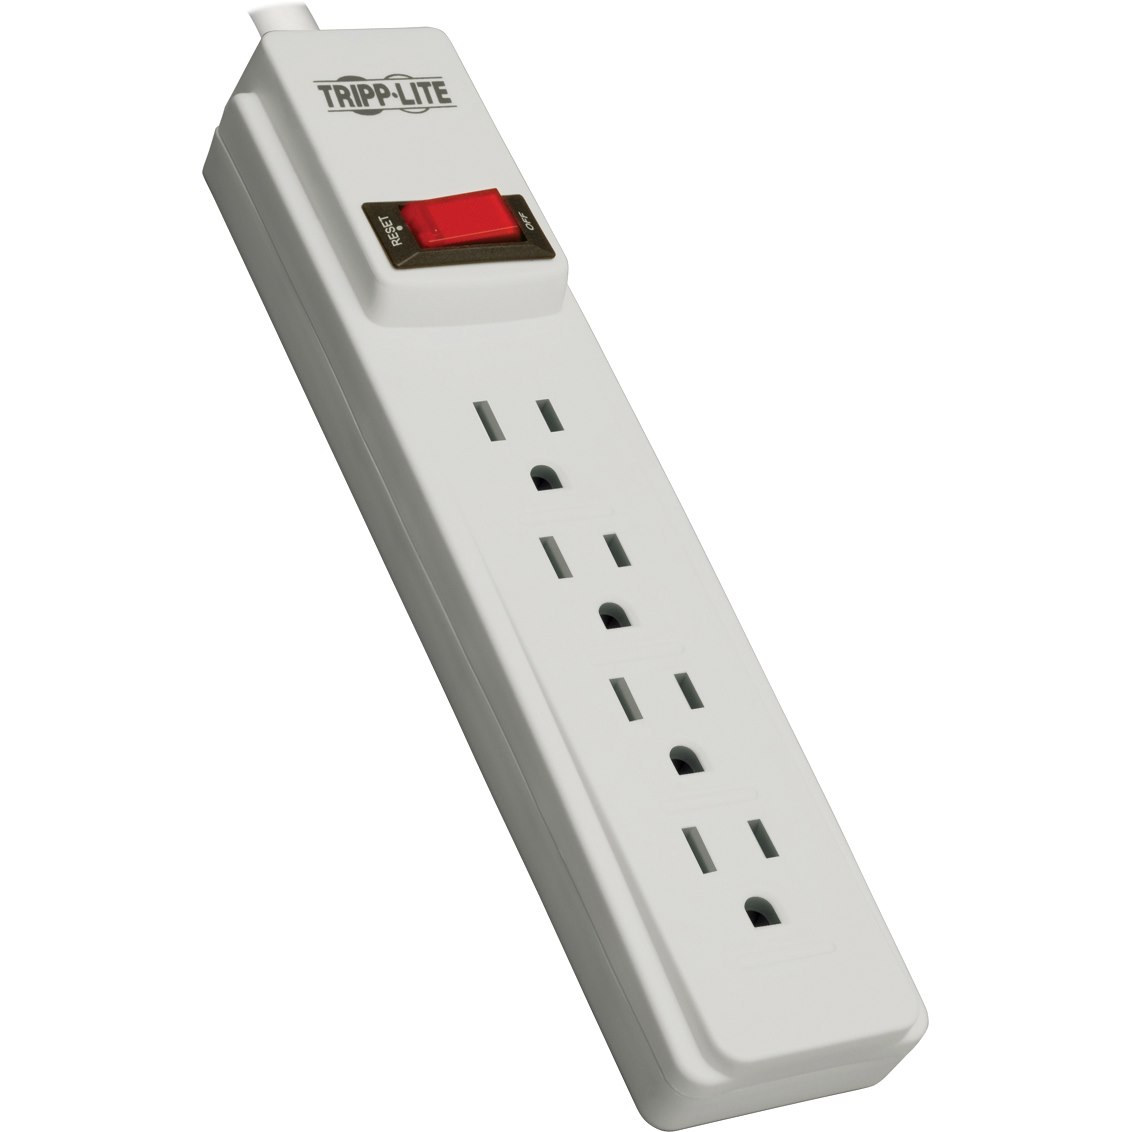 Tripp Lite by Eaton Power Strip 4-Outlet 5-15R 10ft Cord 5-15P with On/Off Switch